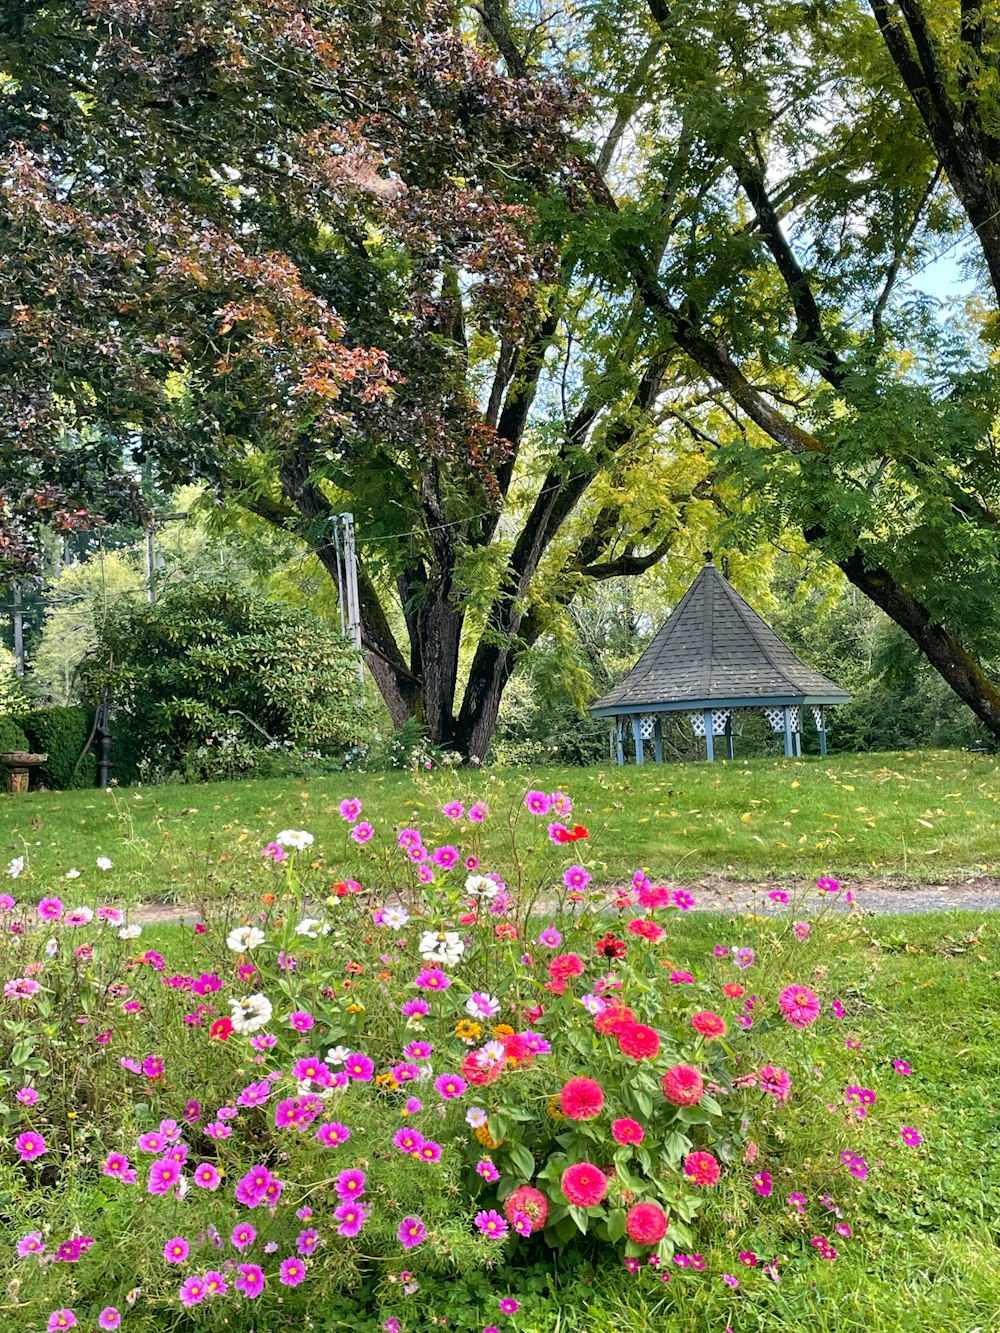 a flower garden with a gazebo in the background